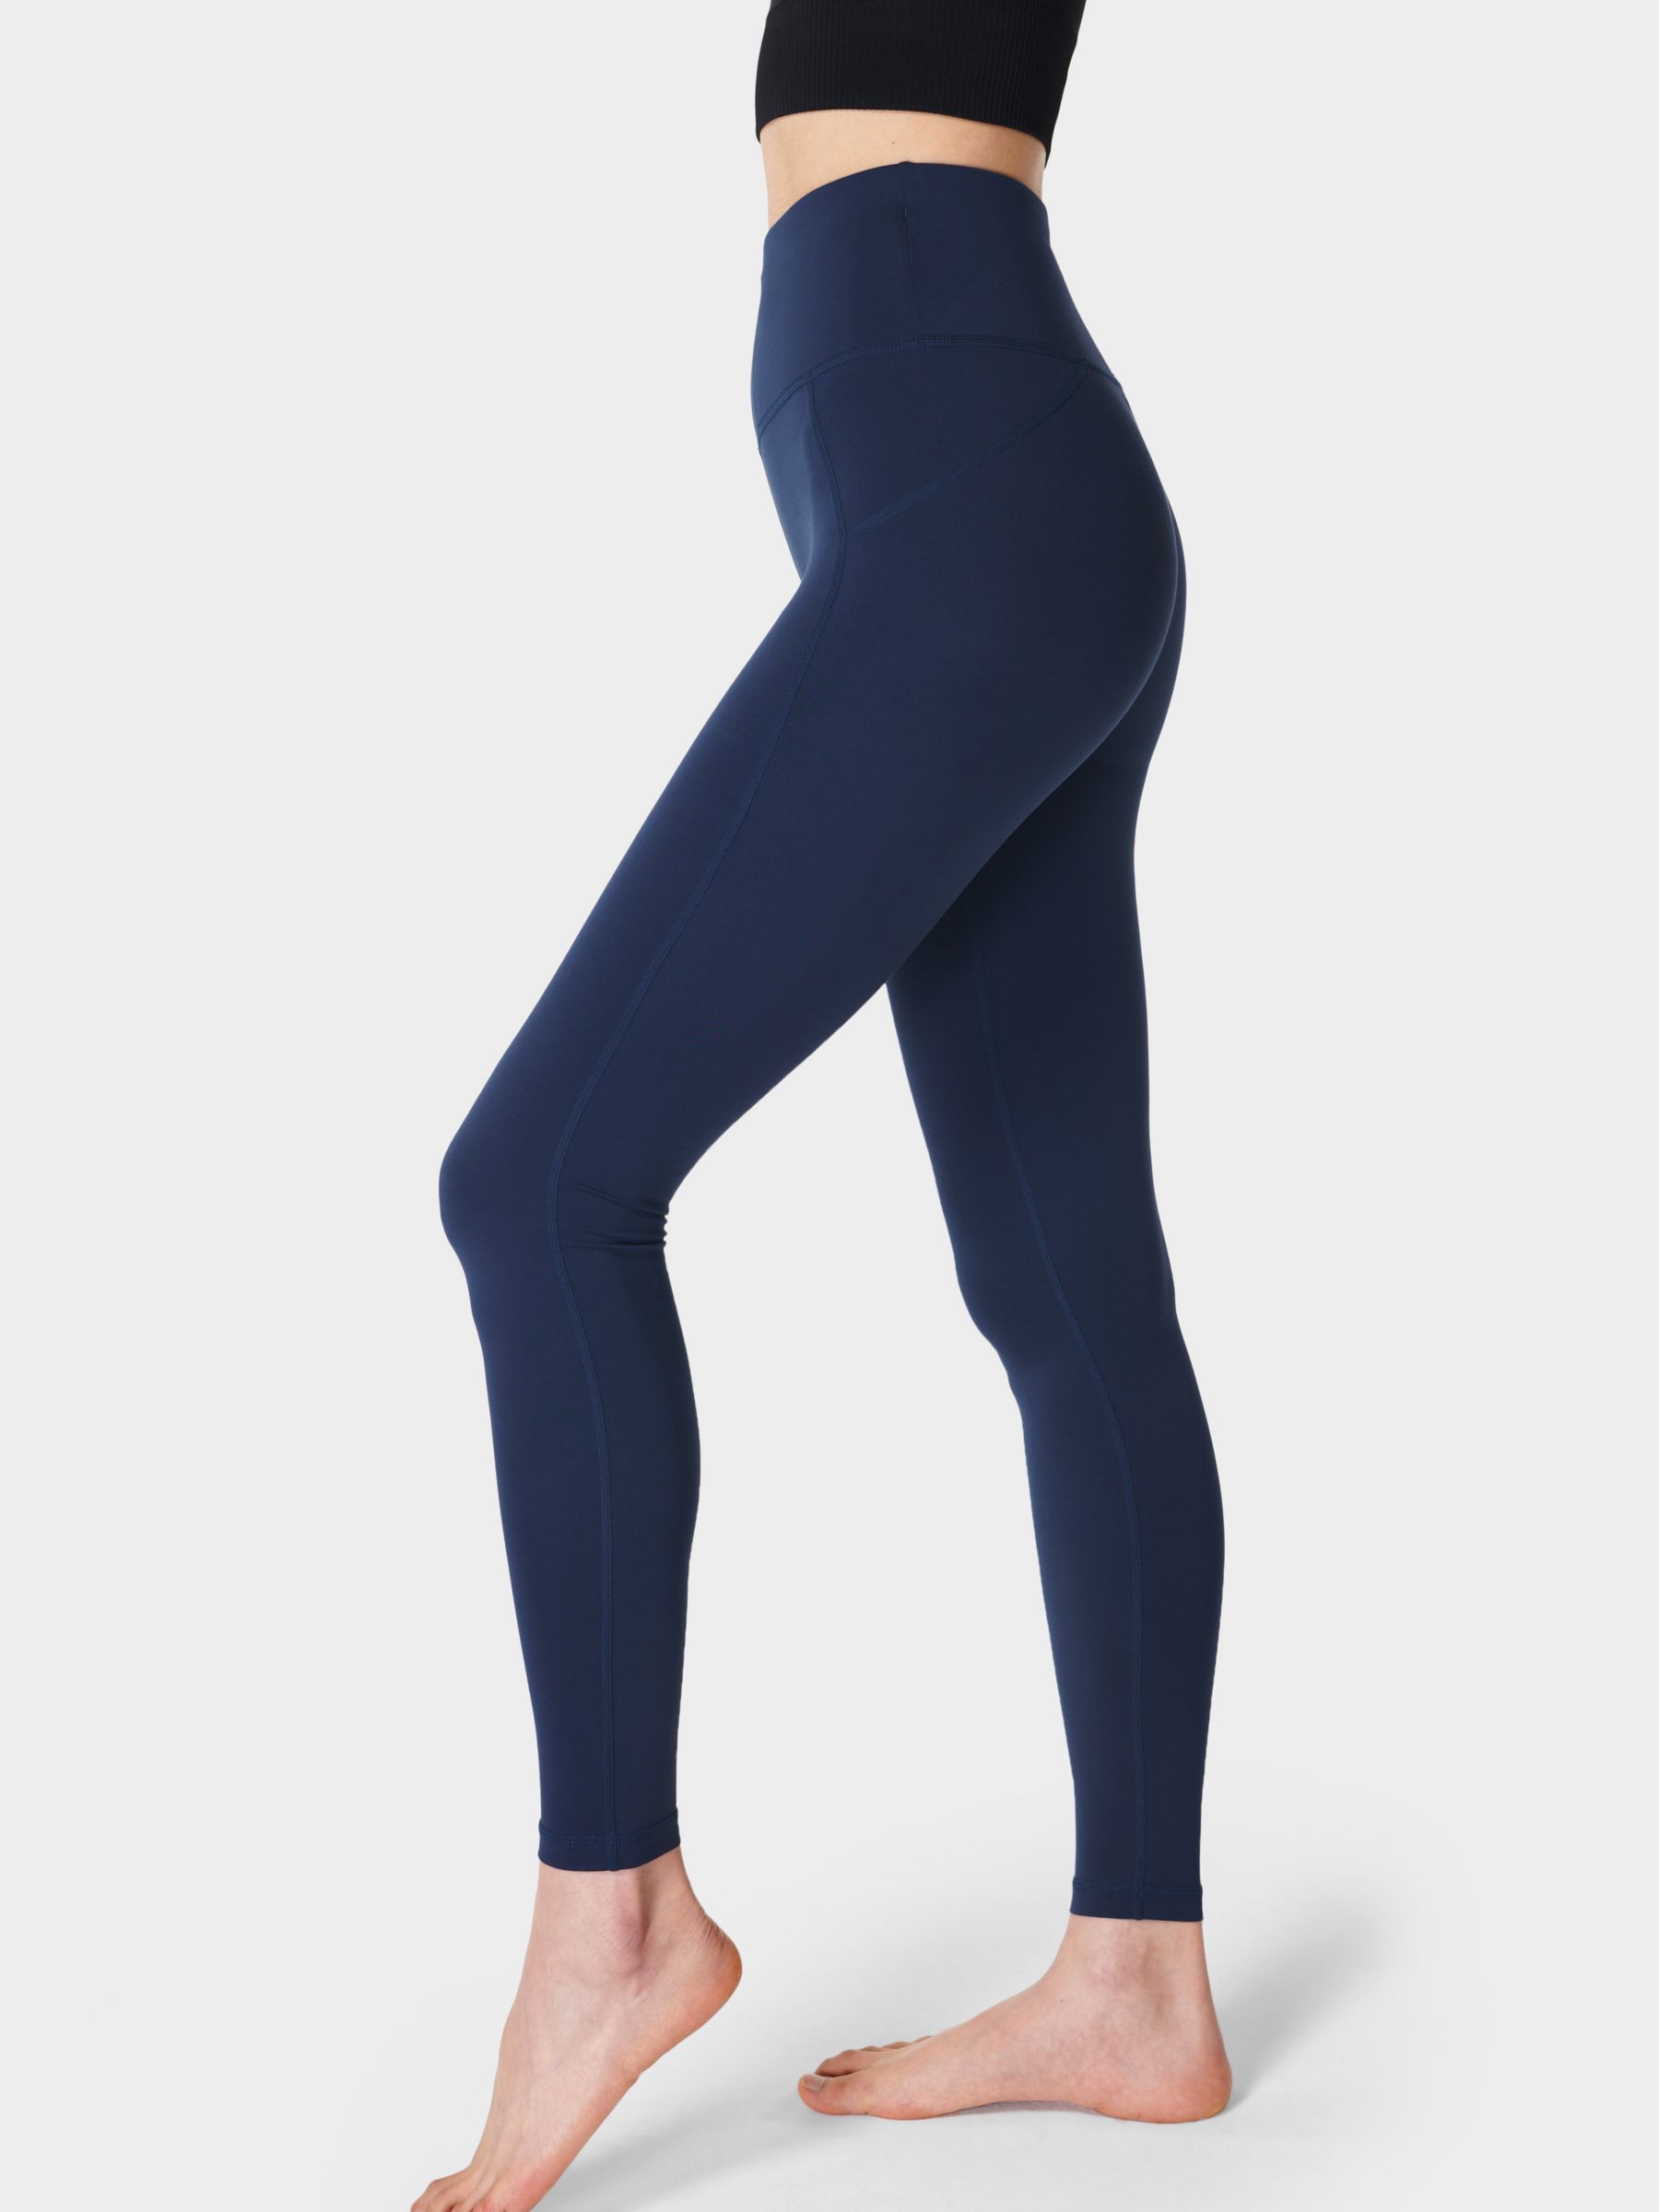 Which Sweaty Betty Leggings Are Squat Proofreading